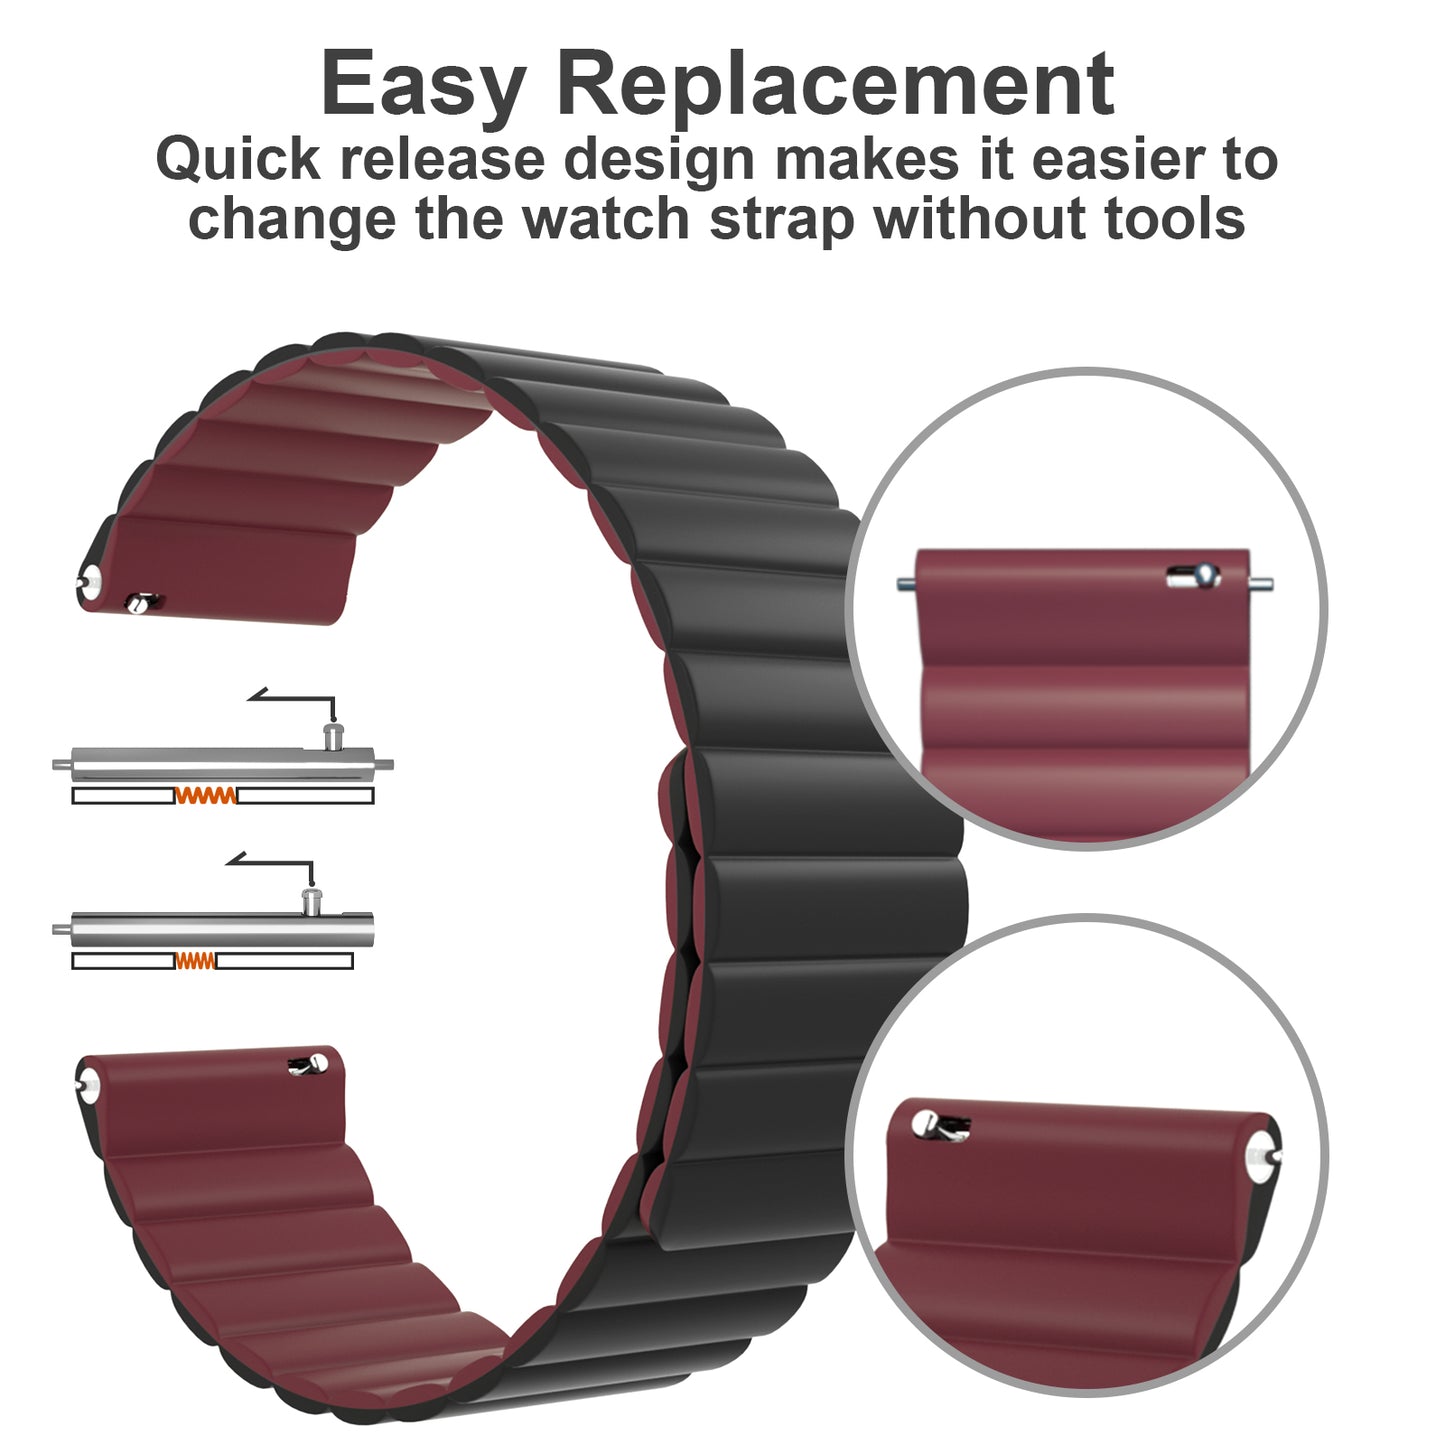 Quick release design makes it easier to change the watch strap without tools